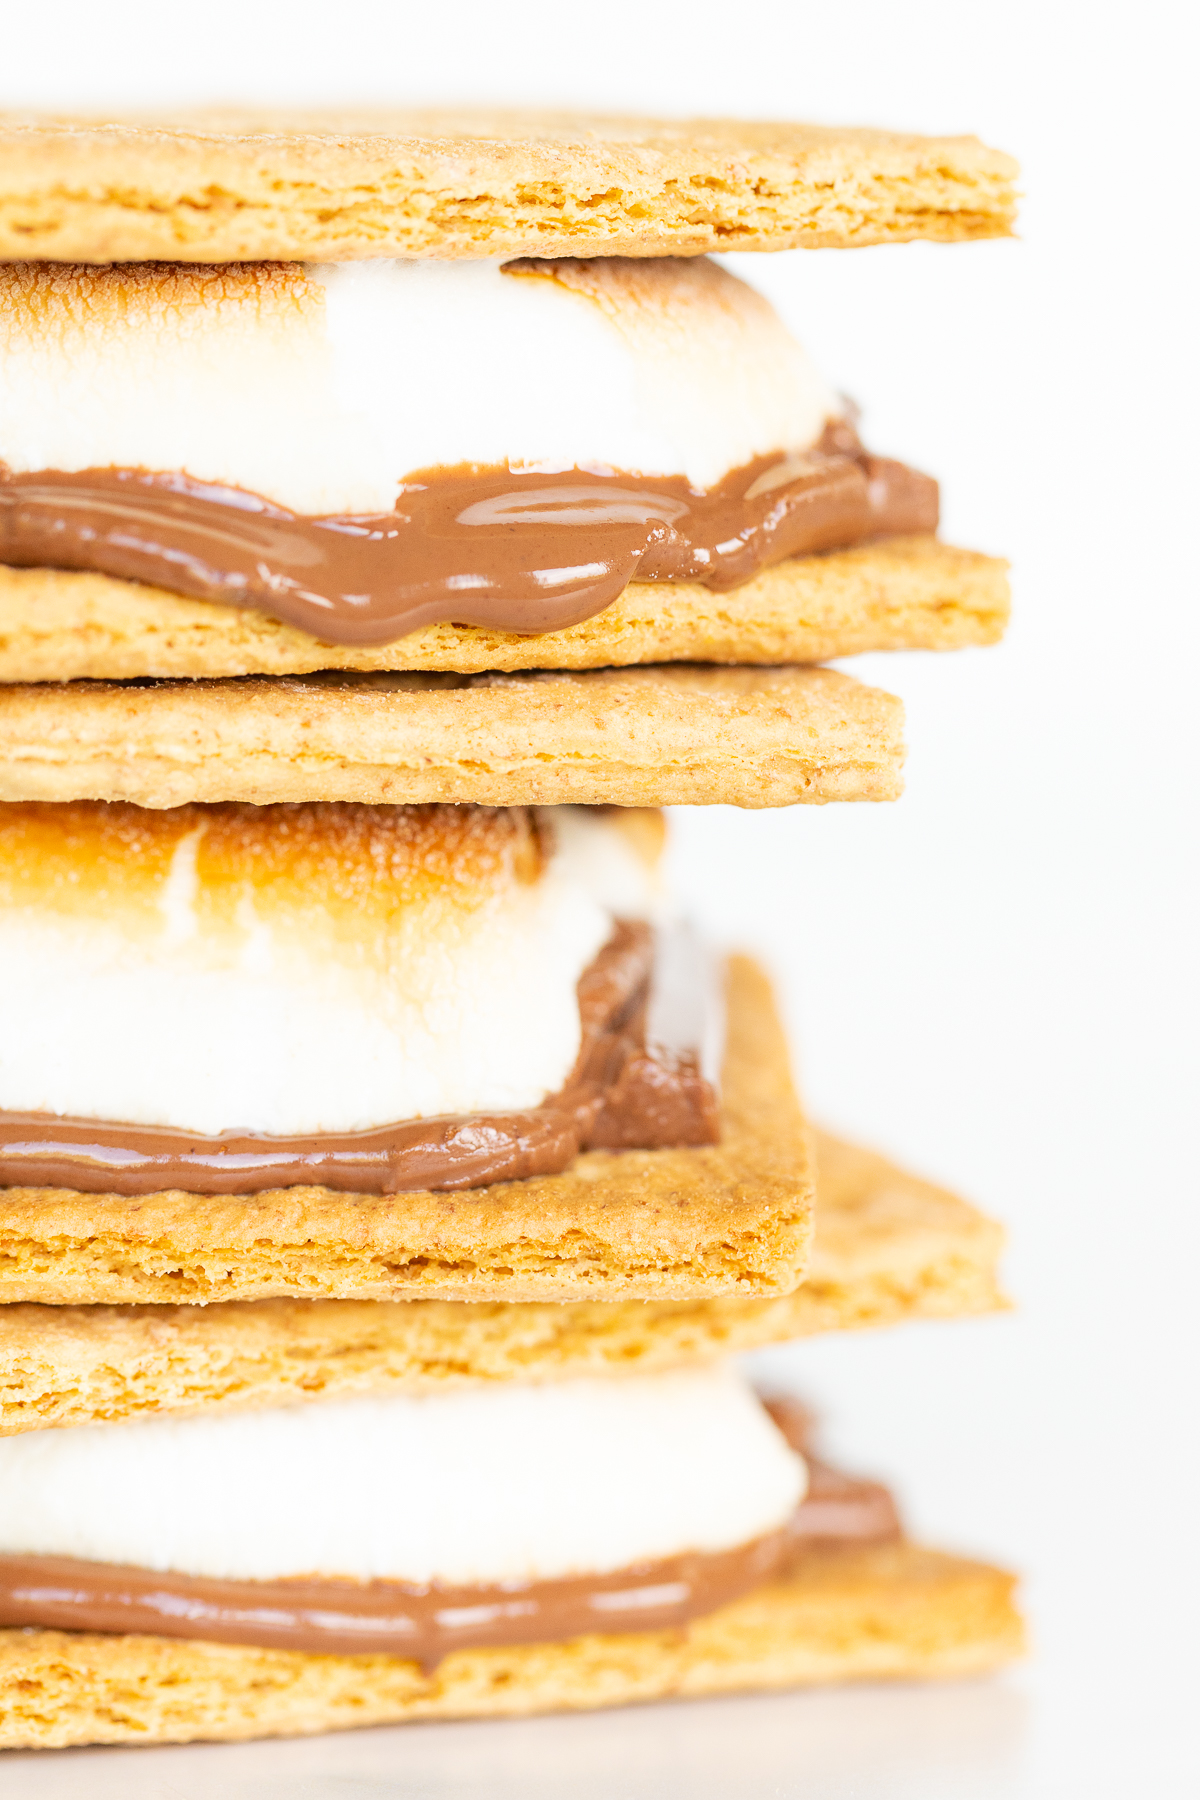 A stack of oven-baked s'mores with chocolate and marshmallows.